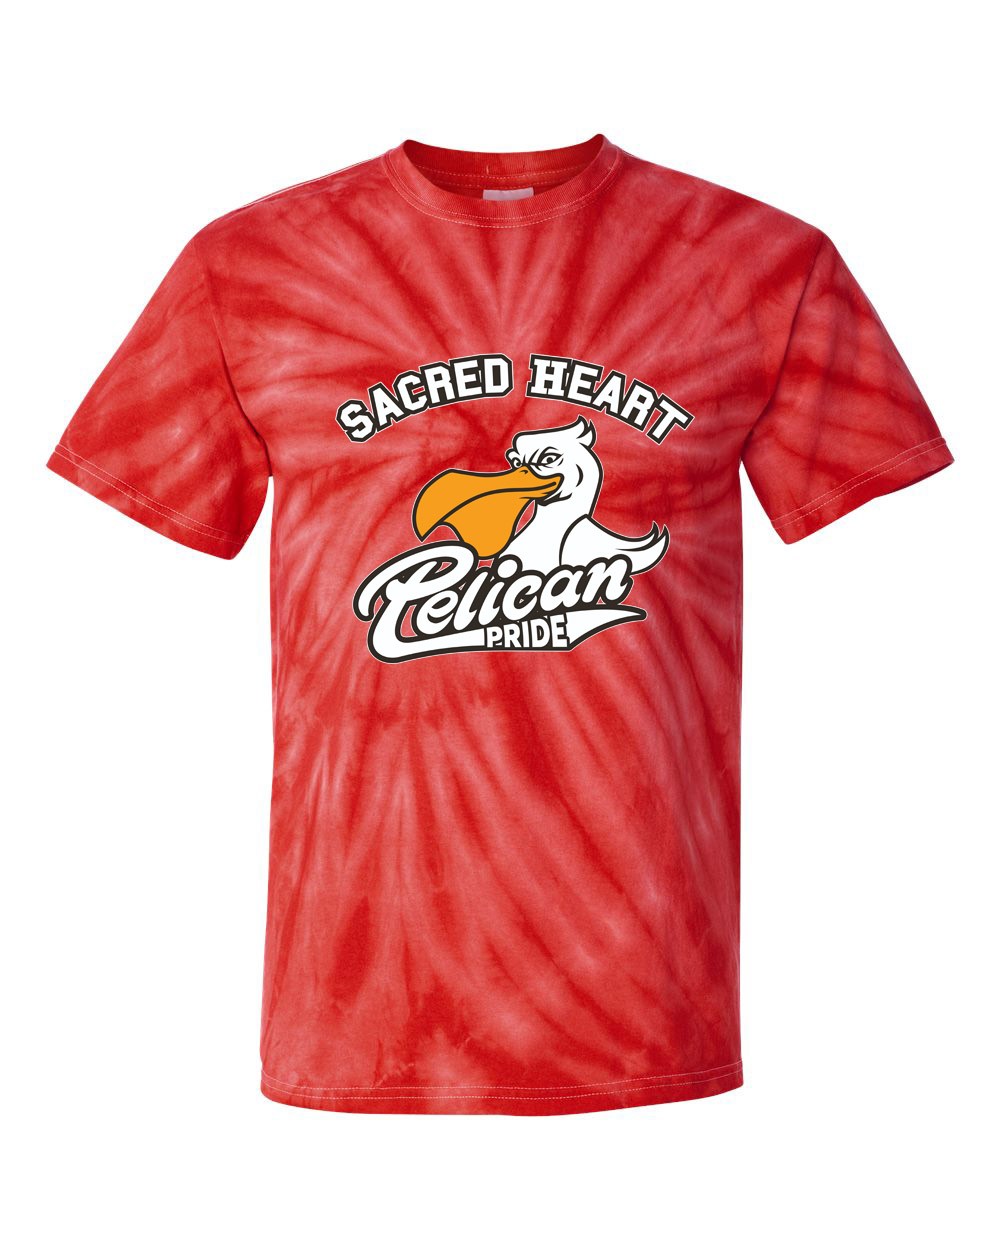 SHS Pelican Pride Staff S/S Tie Dye T-Shirt w/ Logo - Please Allow 2-3 Weeks for Delivery